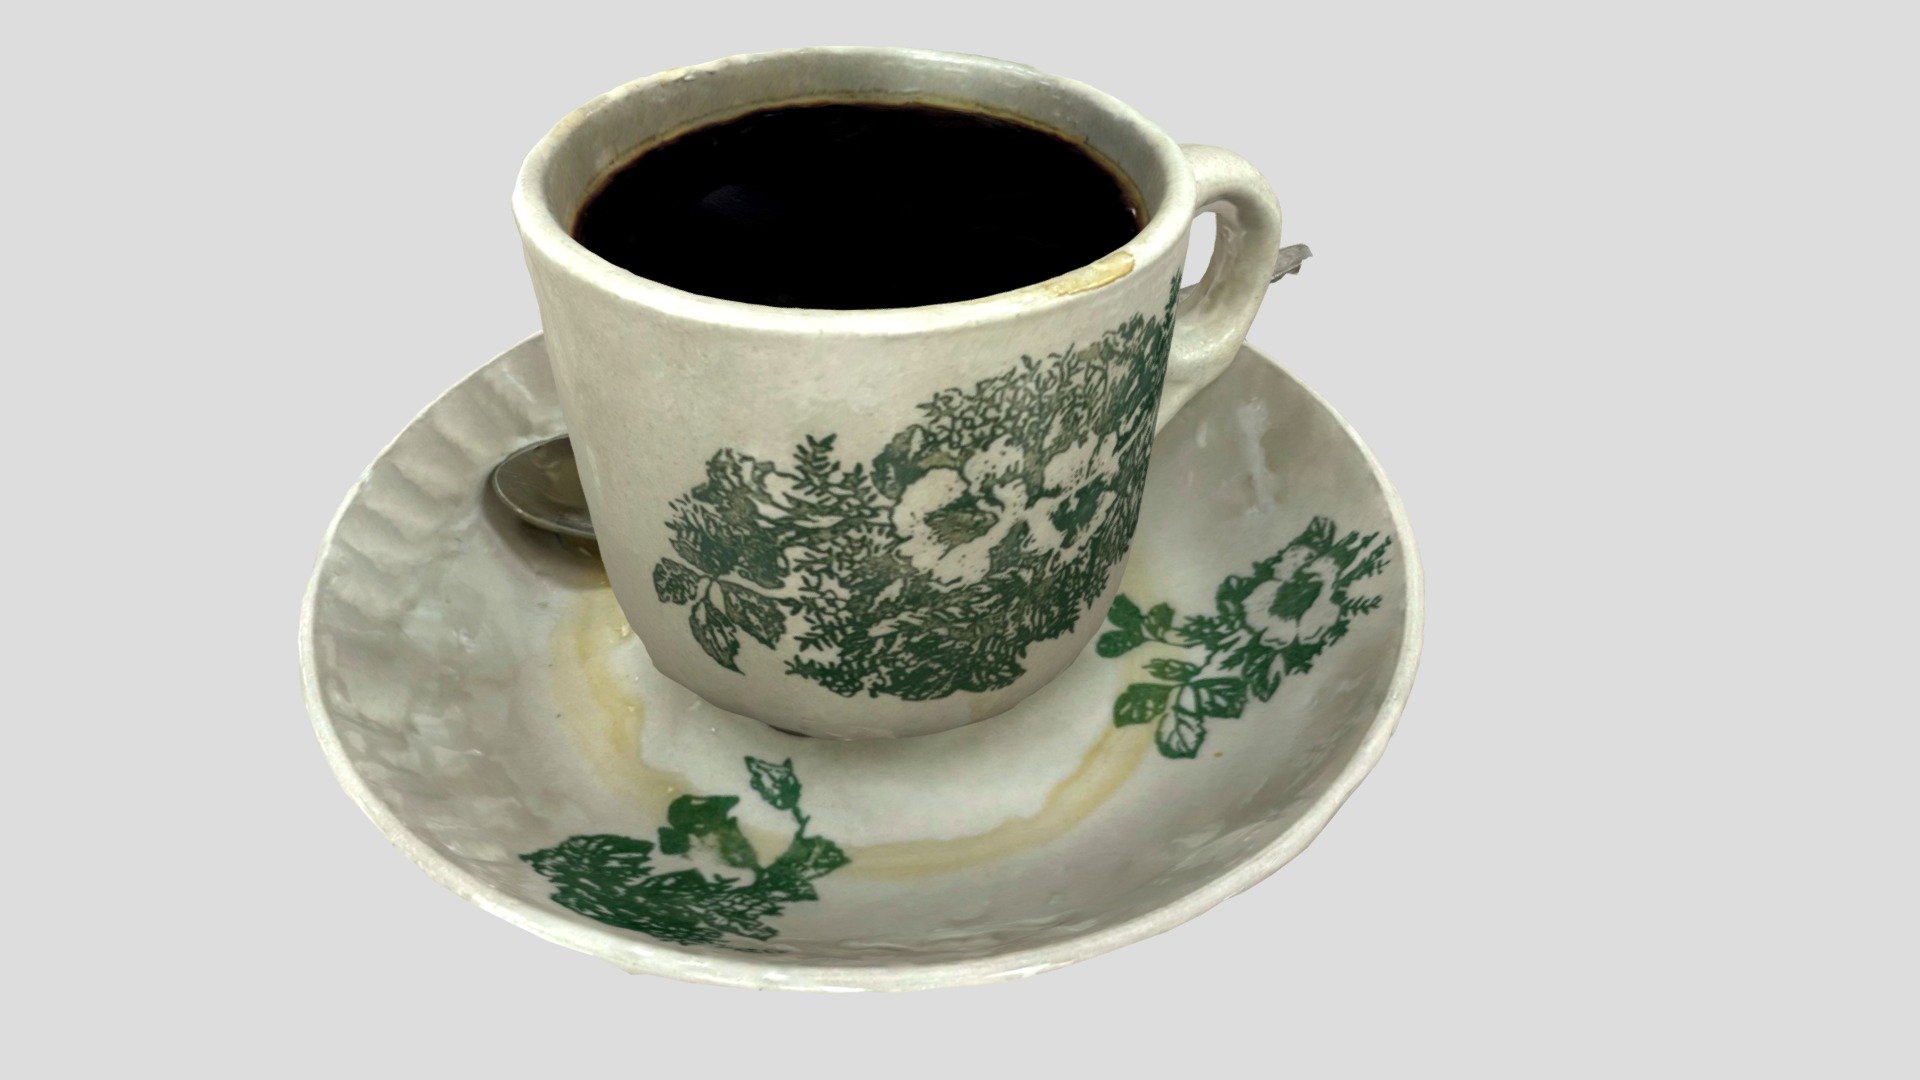 Coffee in 70s/80s coffee cup. Nostalgic 3d model